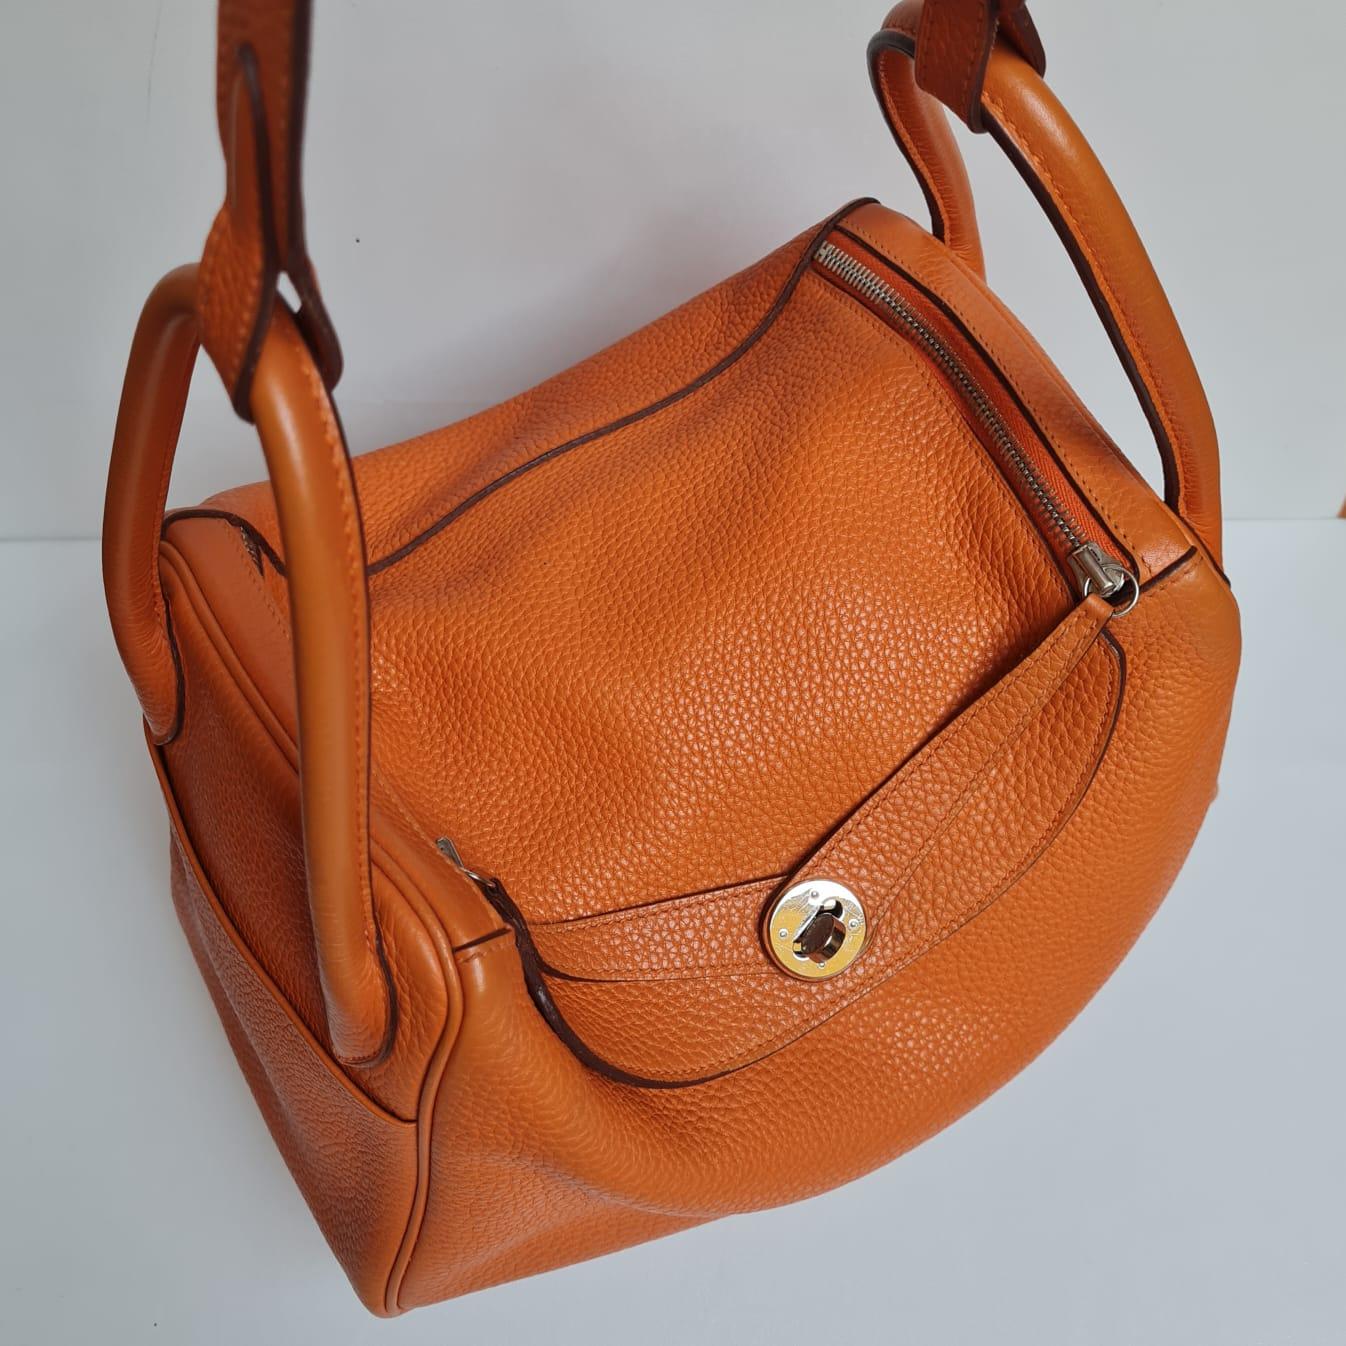 Lindy 30 in orange clemence leather and palladium hardware. Overall still in good condition, with slight rubbing on the corners of the bag and handles as seen on pictures. Light tarnishing on the hardware. Stamp Square O (2011). Comes with its dust